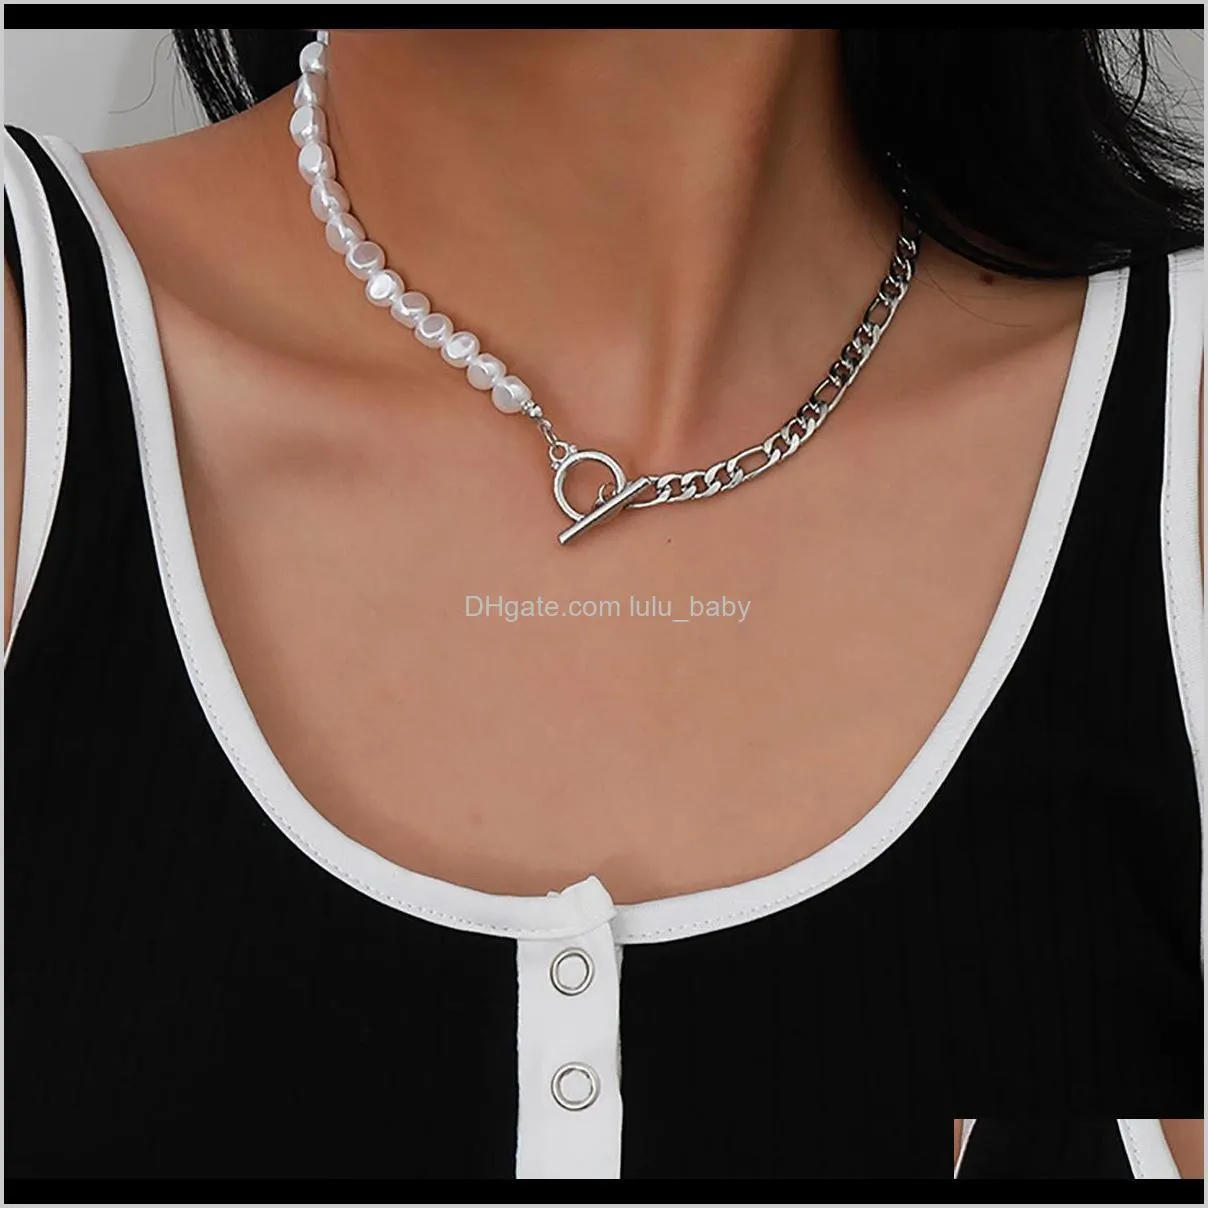 statement choker for necklace chain imitation necklace button pearl women circle bohemian jewelry pendant metal stick cvtos